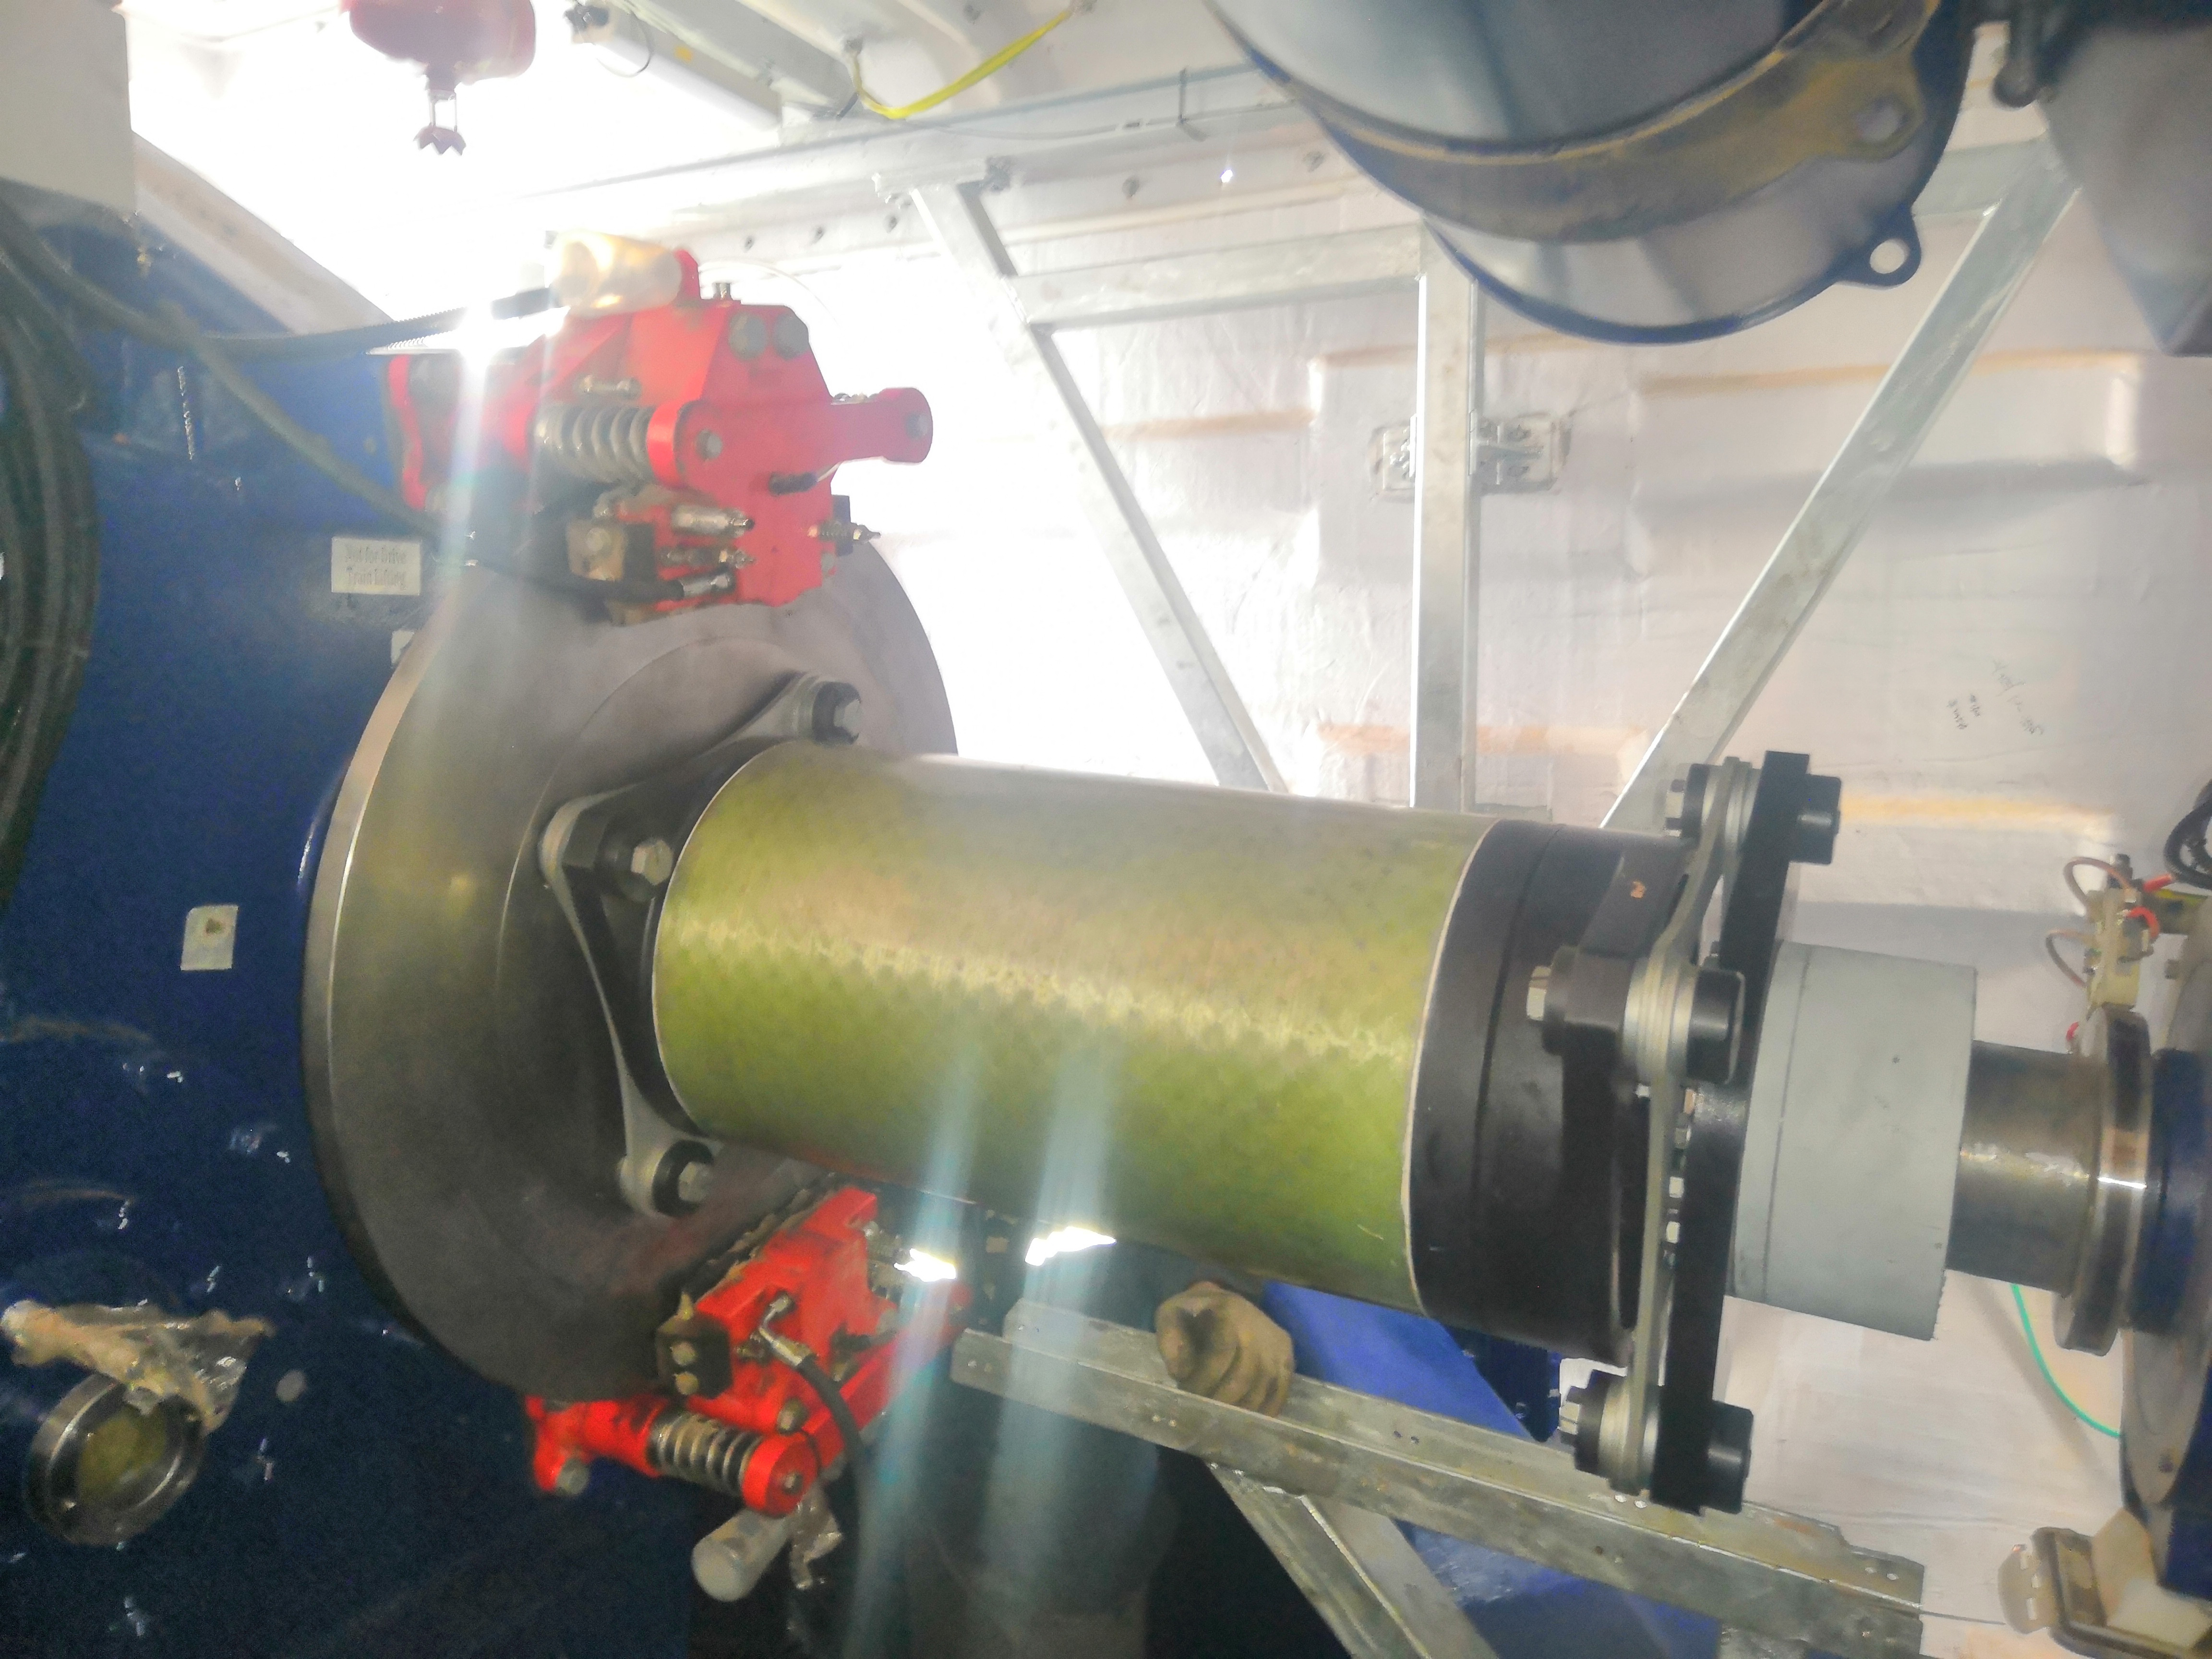 The 3.6MW High Speed Coupling developed by YCM for Xuji was put into operation